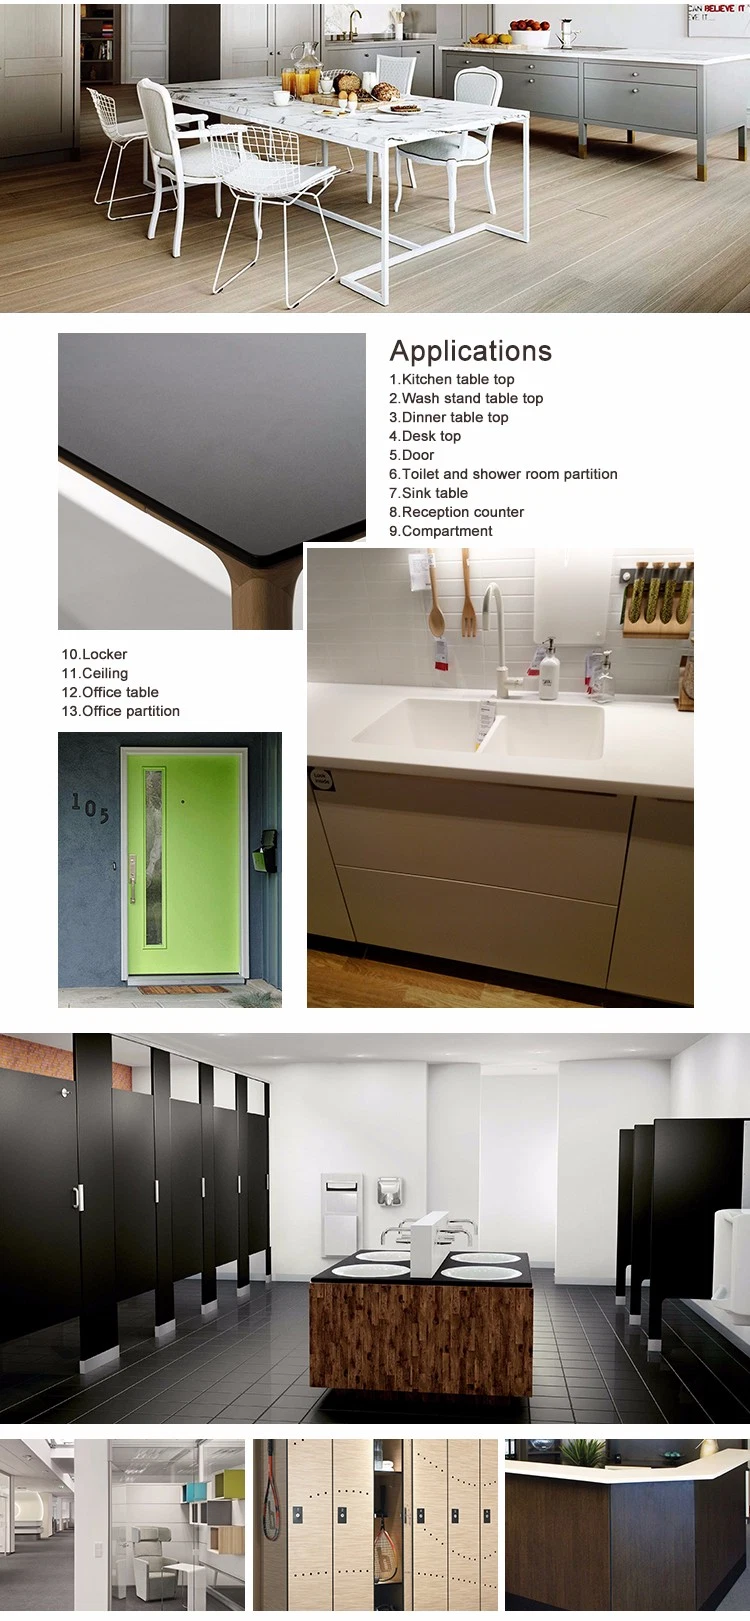 Waterproof Compact Laminate Board for Toilet Cubicle Partition